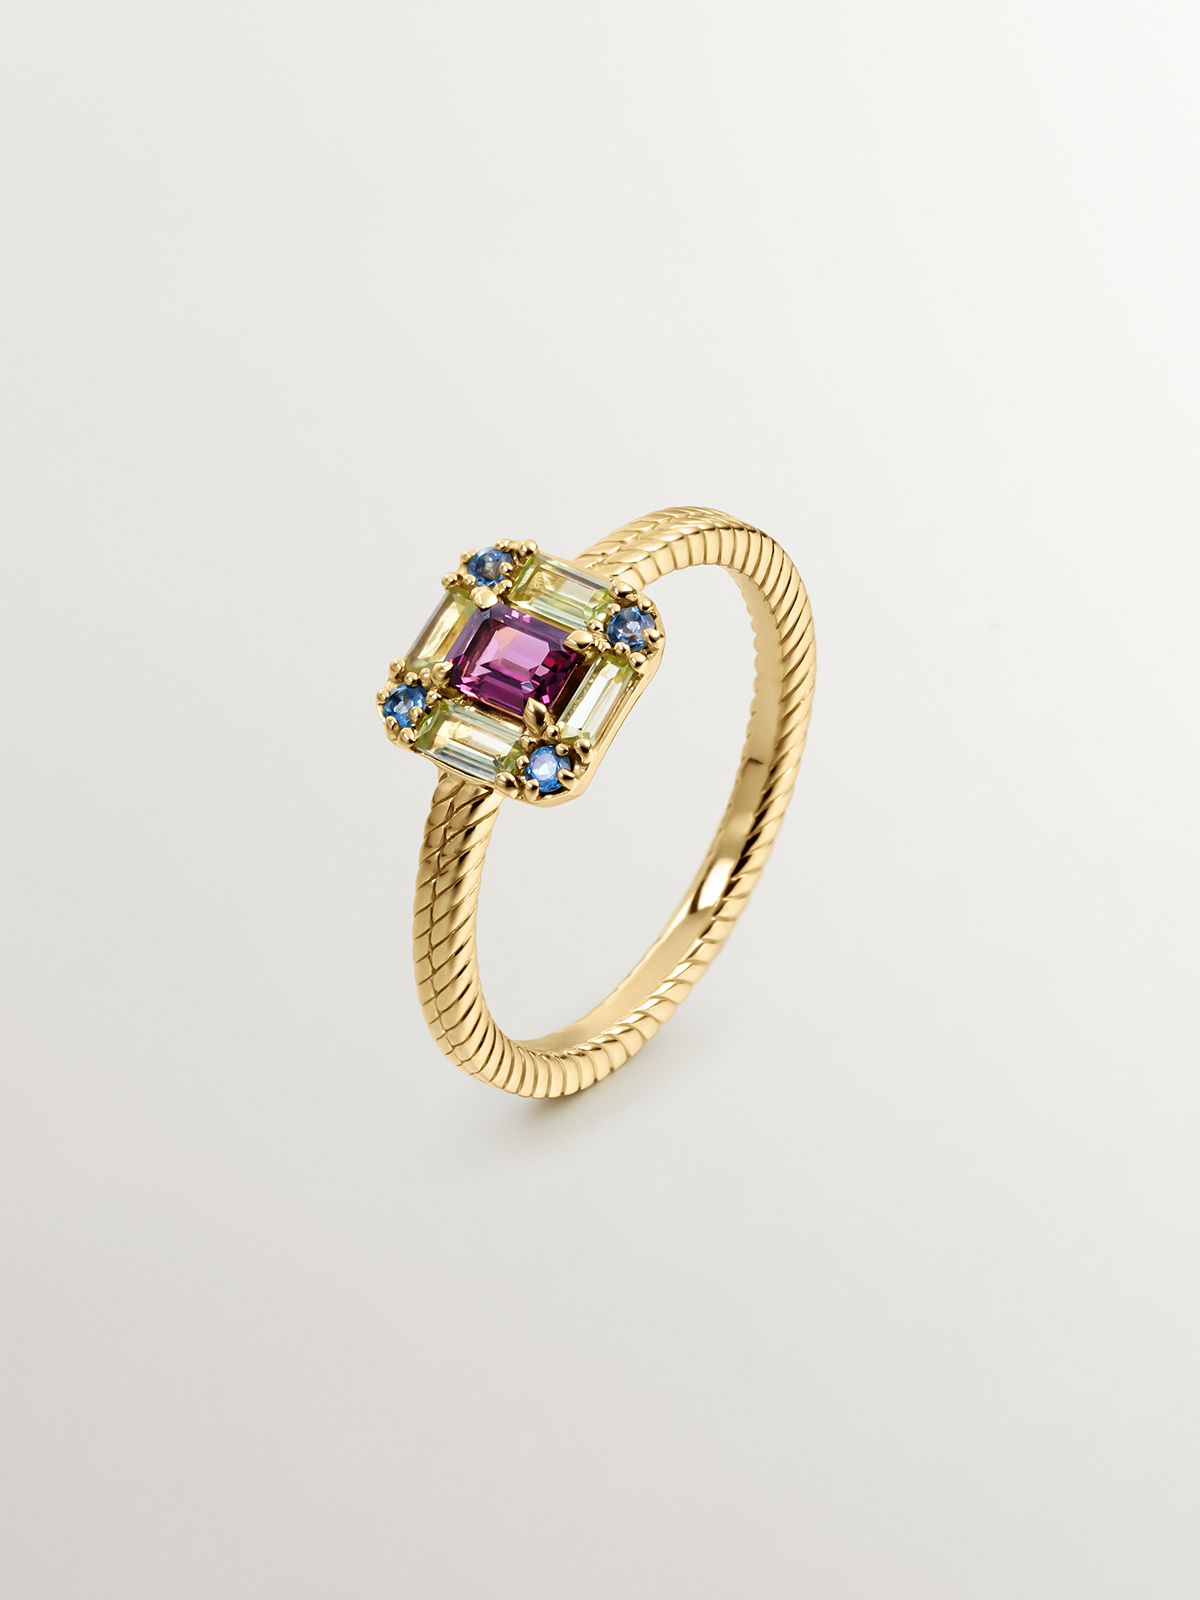 925 Silver ring bathed in 18K yellow gold with rhodolite, peridot, and topaz.